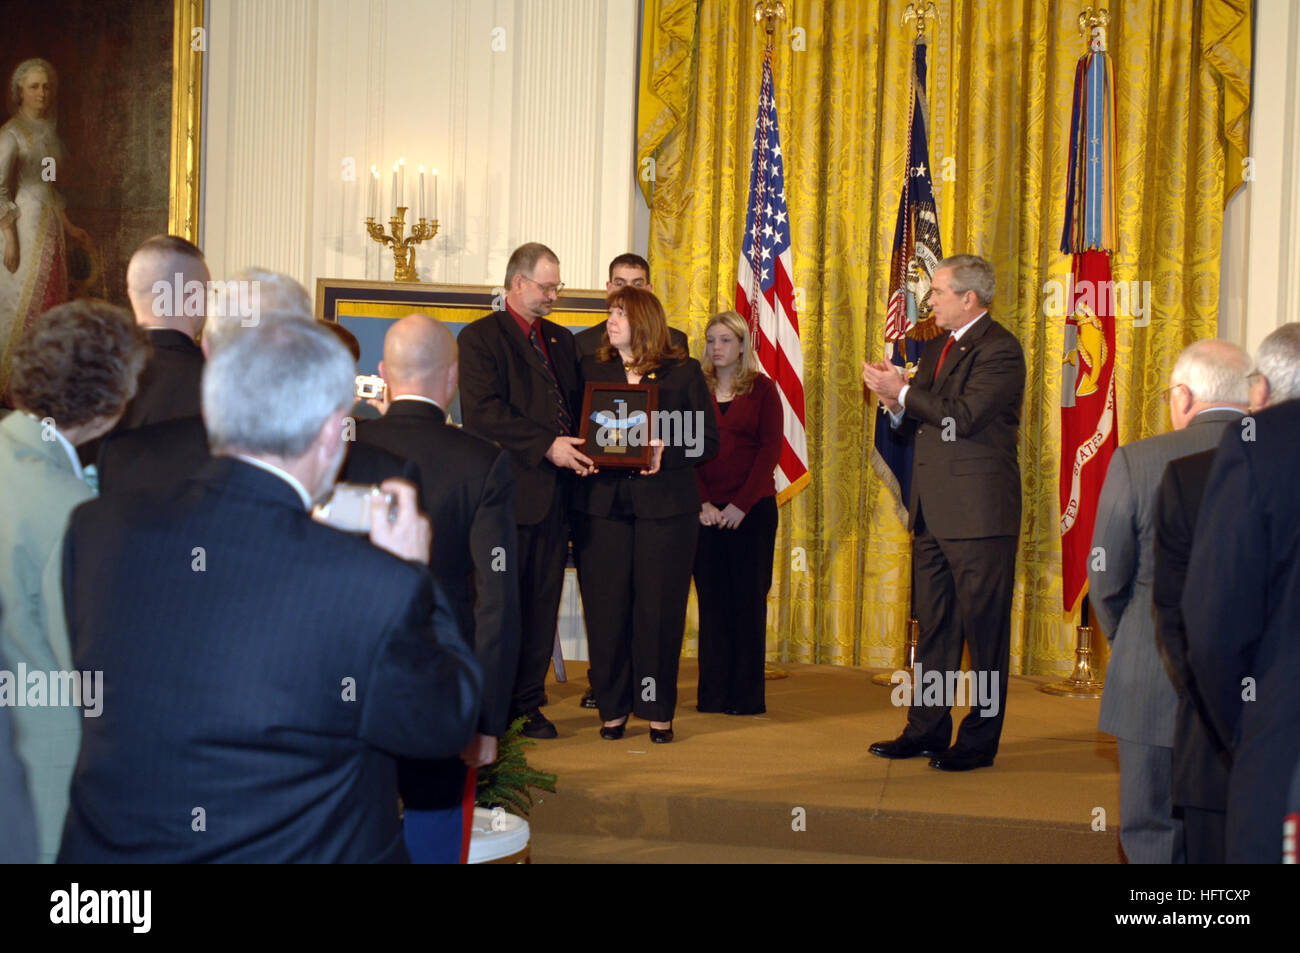 070111-N-1993R-027 Washington, D.C. (Jan. 11, 2007) Ð President George W. Bush stands aside after presenting the Medal of Honor to the family of Cpl. Jason L. Dunham during a ceremony at the White House. Dunham died April 22, 2004, at Bethesda Naval Hospital in Bethesda, Md., of injuries sustained on April 14, when he used his body to shield fellow Marines from a grenade explosion in Husaybah, Iraq. U.S. Navy photo by Mass Communication Specialist 1st Class Rob Rubio (RELEASED) US Navy 070111-N-1993R-027 President George W. Bush stands aside after presenting the Medal of Honor to the family of Stock Photo